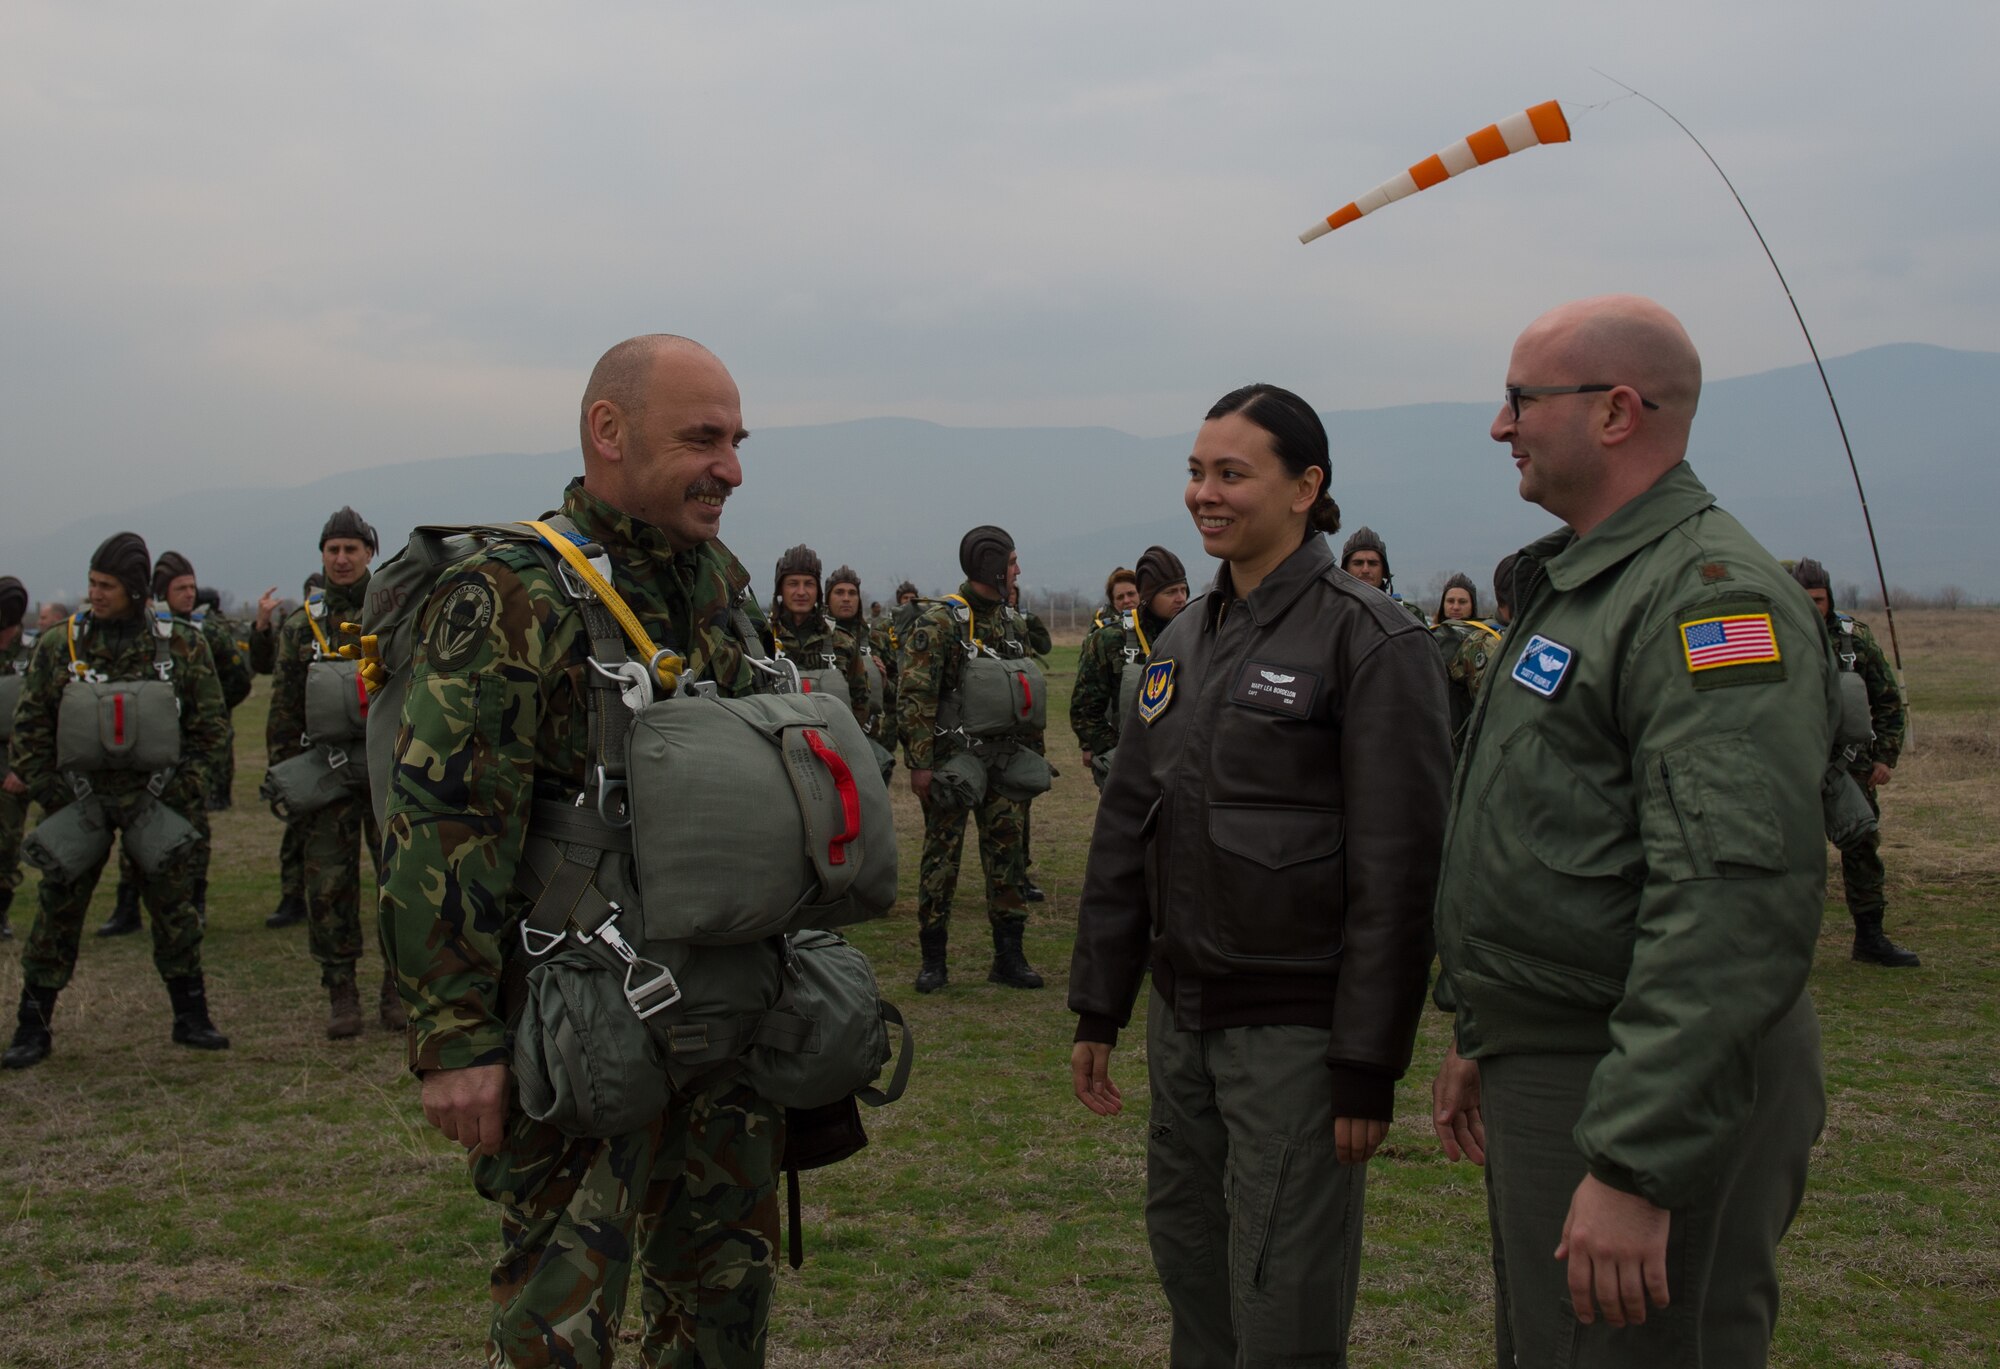 Col. Yordan Yordanov, Republic of Bulgaria Ministry of Defense, deputy director of joint facilities and coordination directorate, left, talks with 37th Airlift Squadron Exercise Thracian Spring mission commanders, Capt. Mary Bordelon and Maj. Scott Hendrix, right, at Plovdiv Regional Airport, Bulgaria, March 15, 2017.  Ramstein Air Base Airmen partnered with the Bulgarian military for the two-week exercise.  The U.S. Air Force’s forward presence in Europe allows Airmen to work with our NATO Allies and partners, to develop ready air forces capable of maintaining regional security.  (U.S. Air Force photo by Staff Sgt. Nesha Humes)